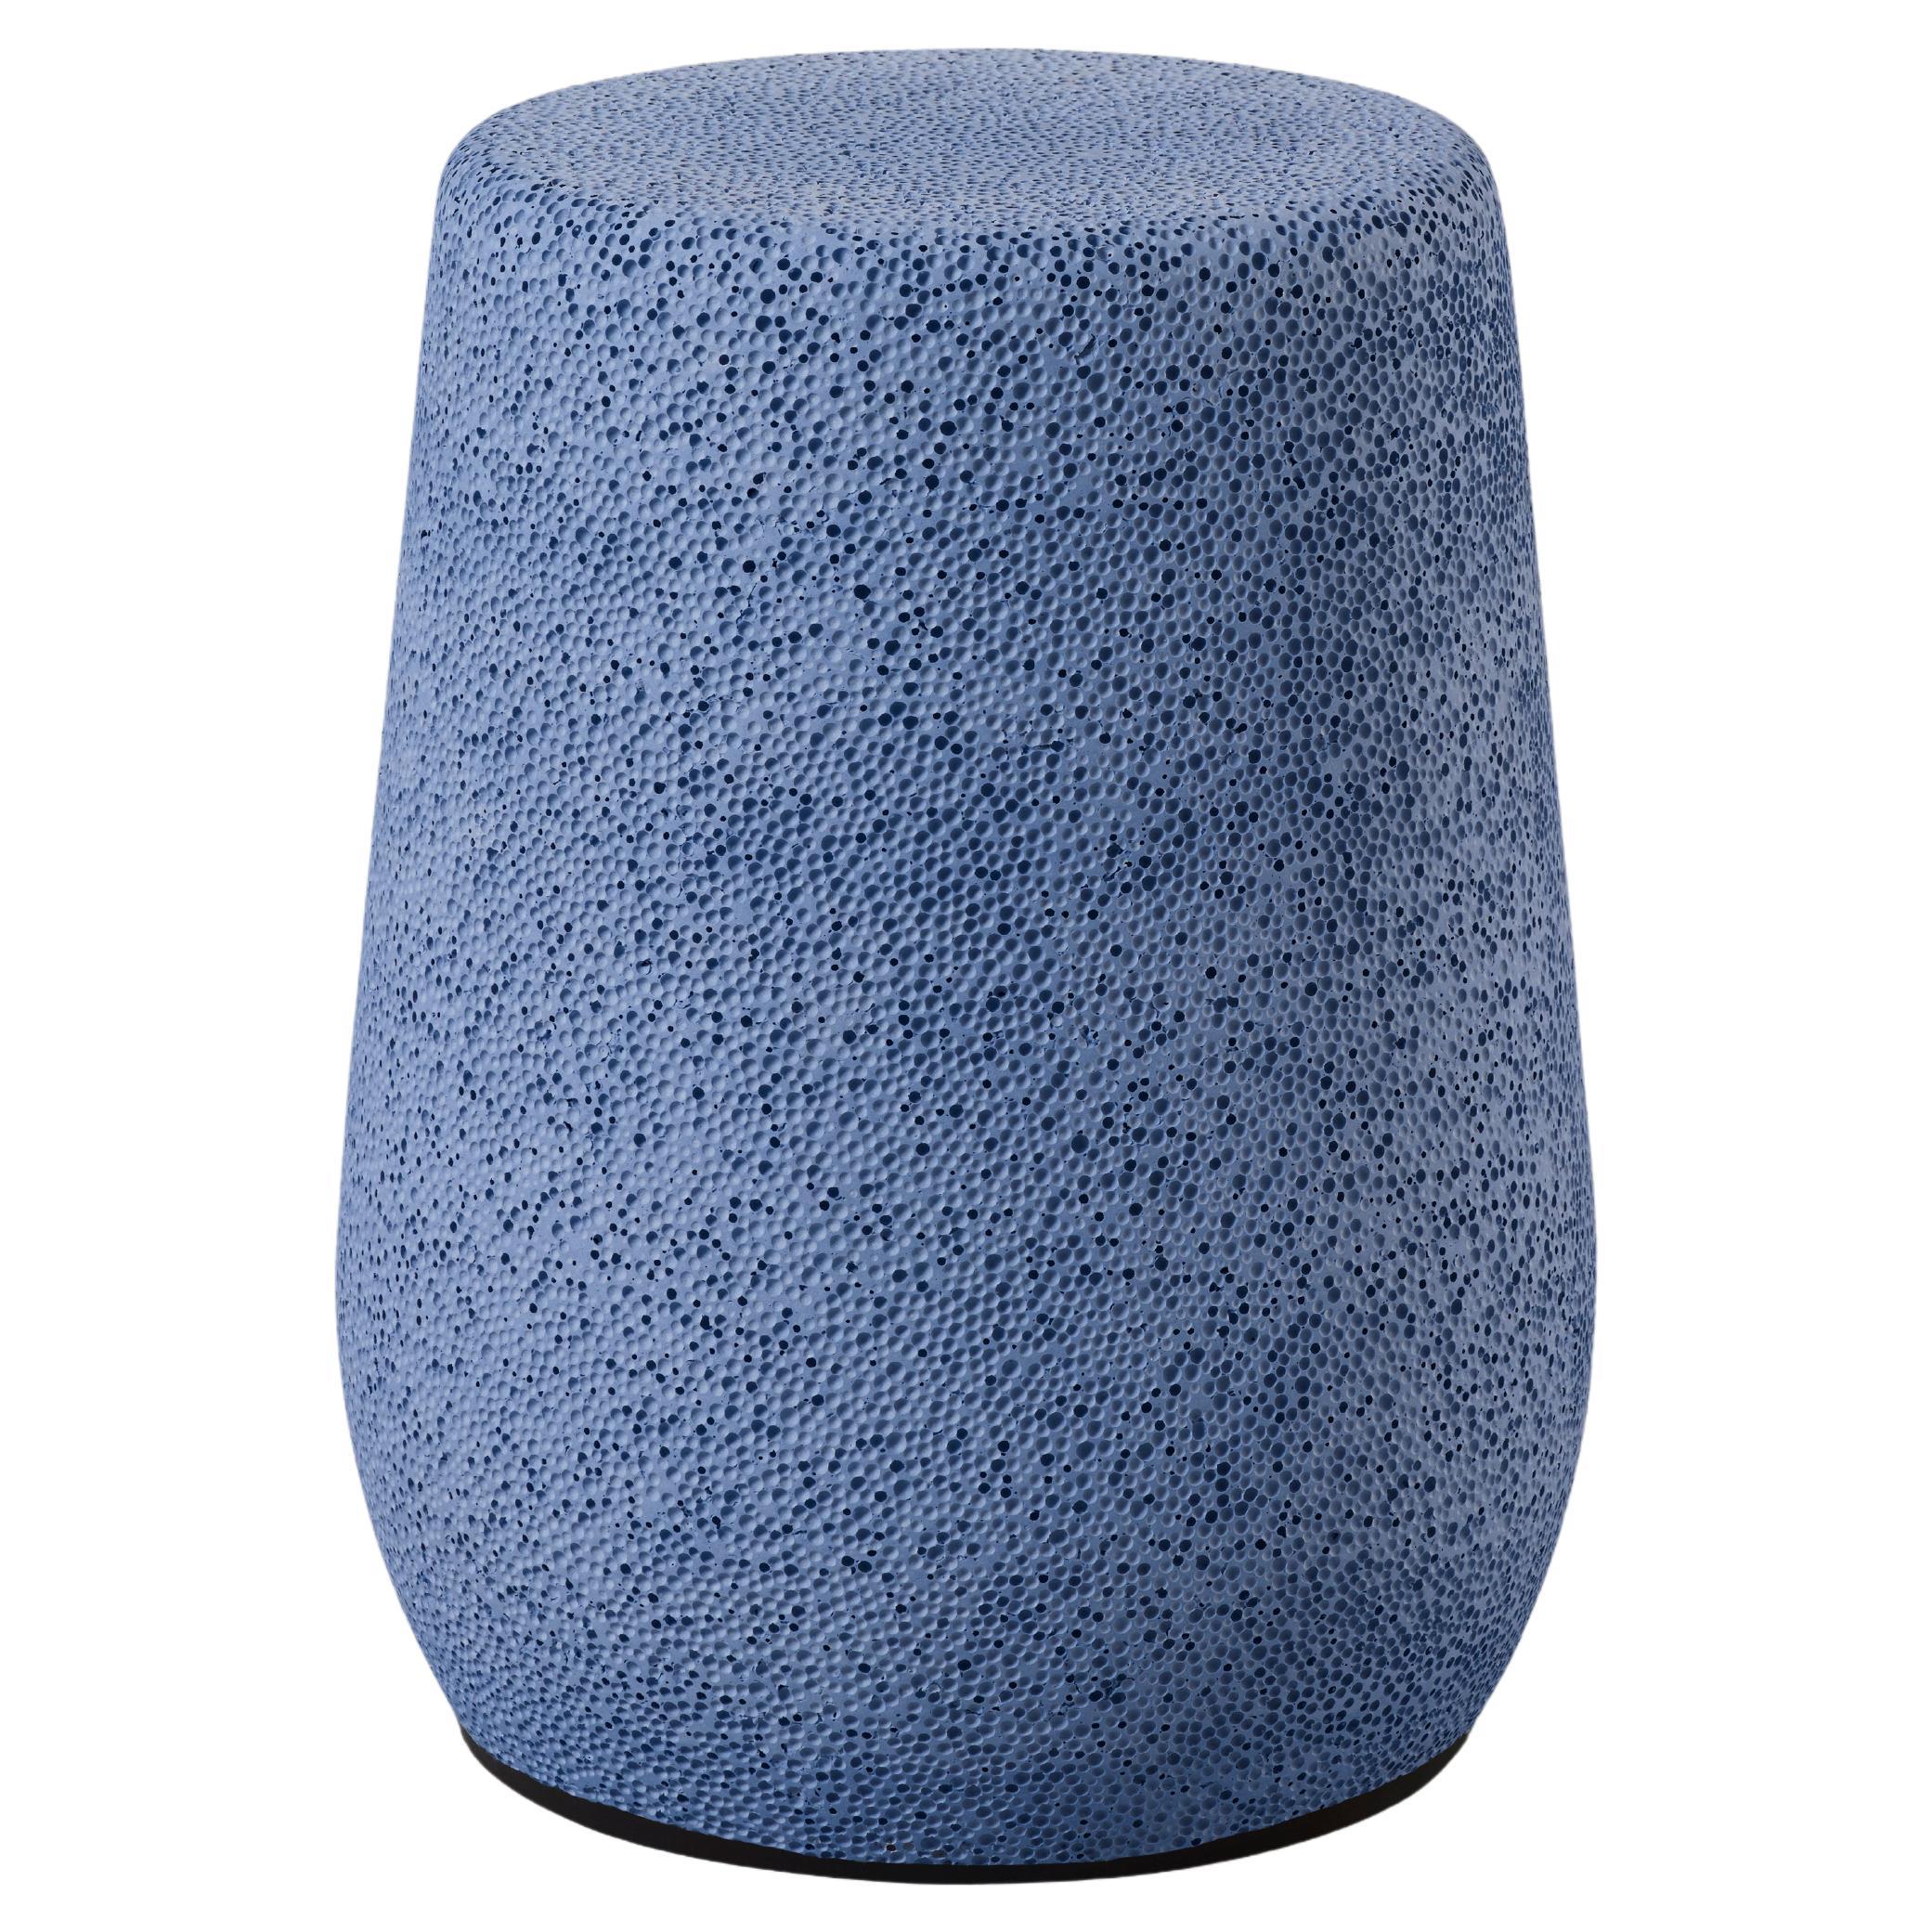 'Lightweight Porcelain' Stool and Side Table by Djim Berger - Dark Blue For Sale